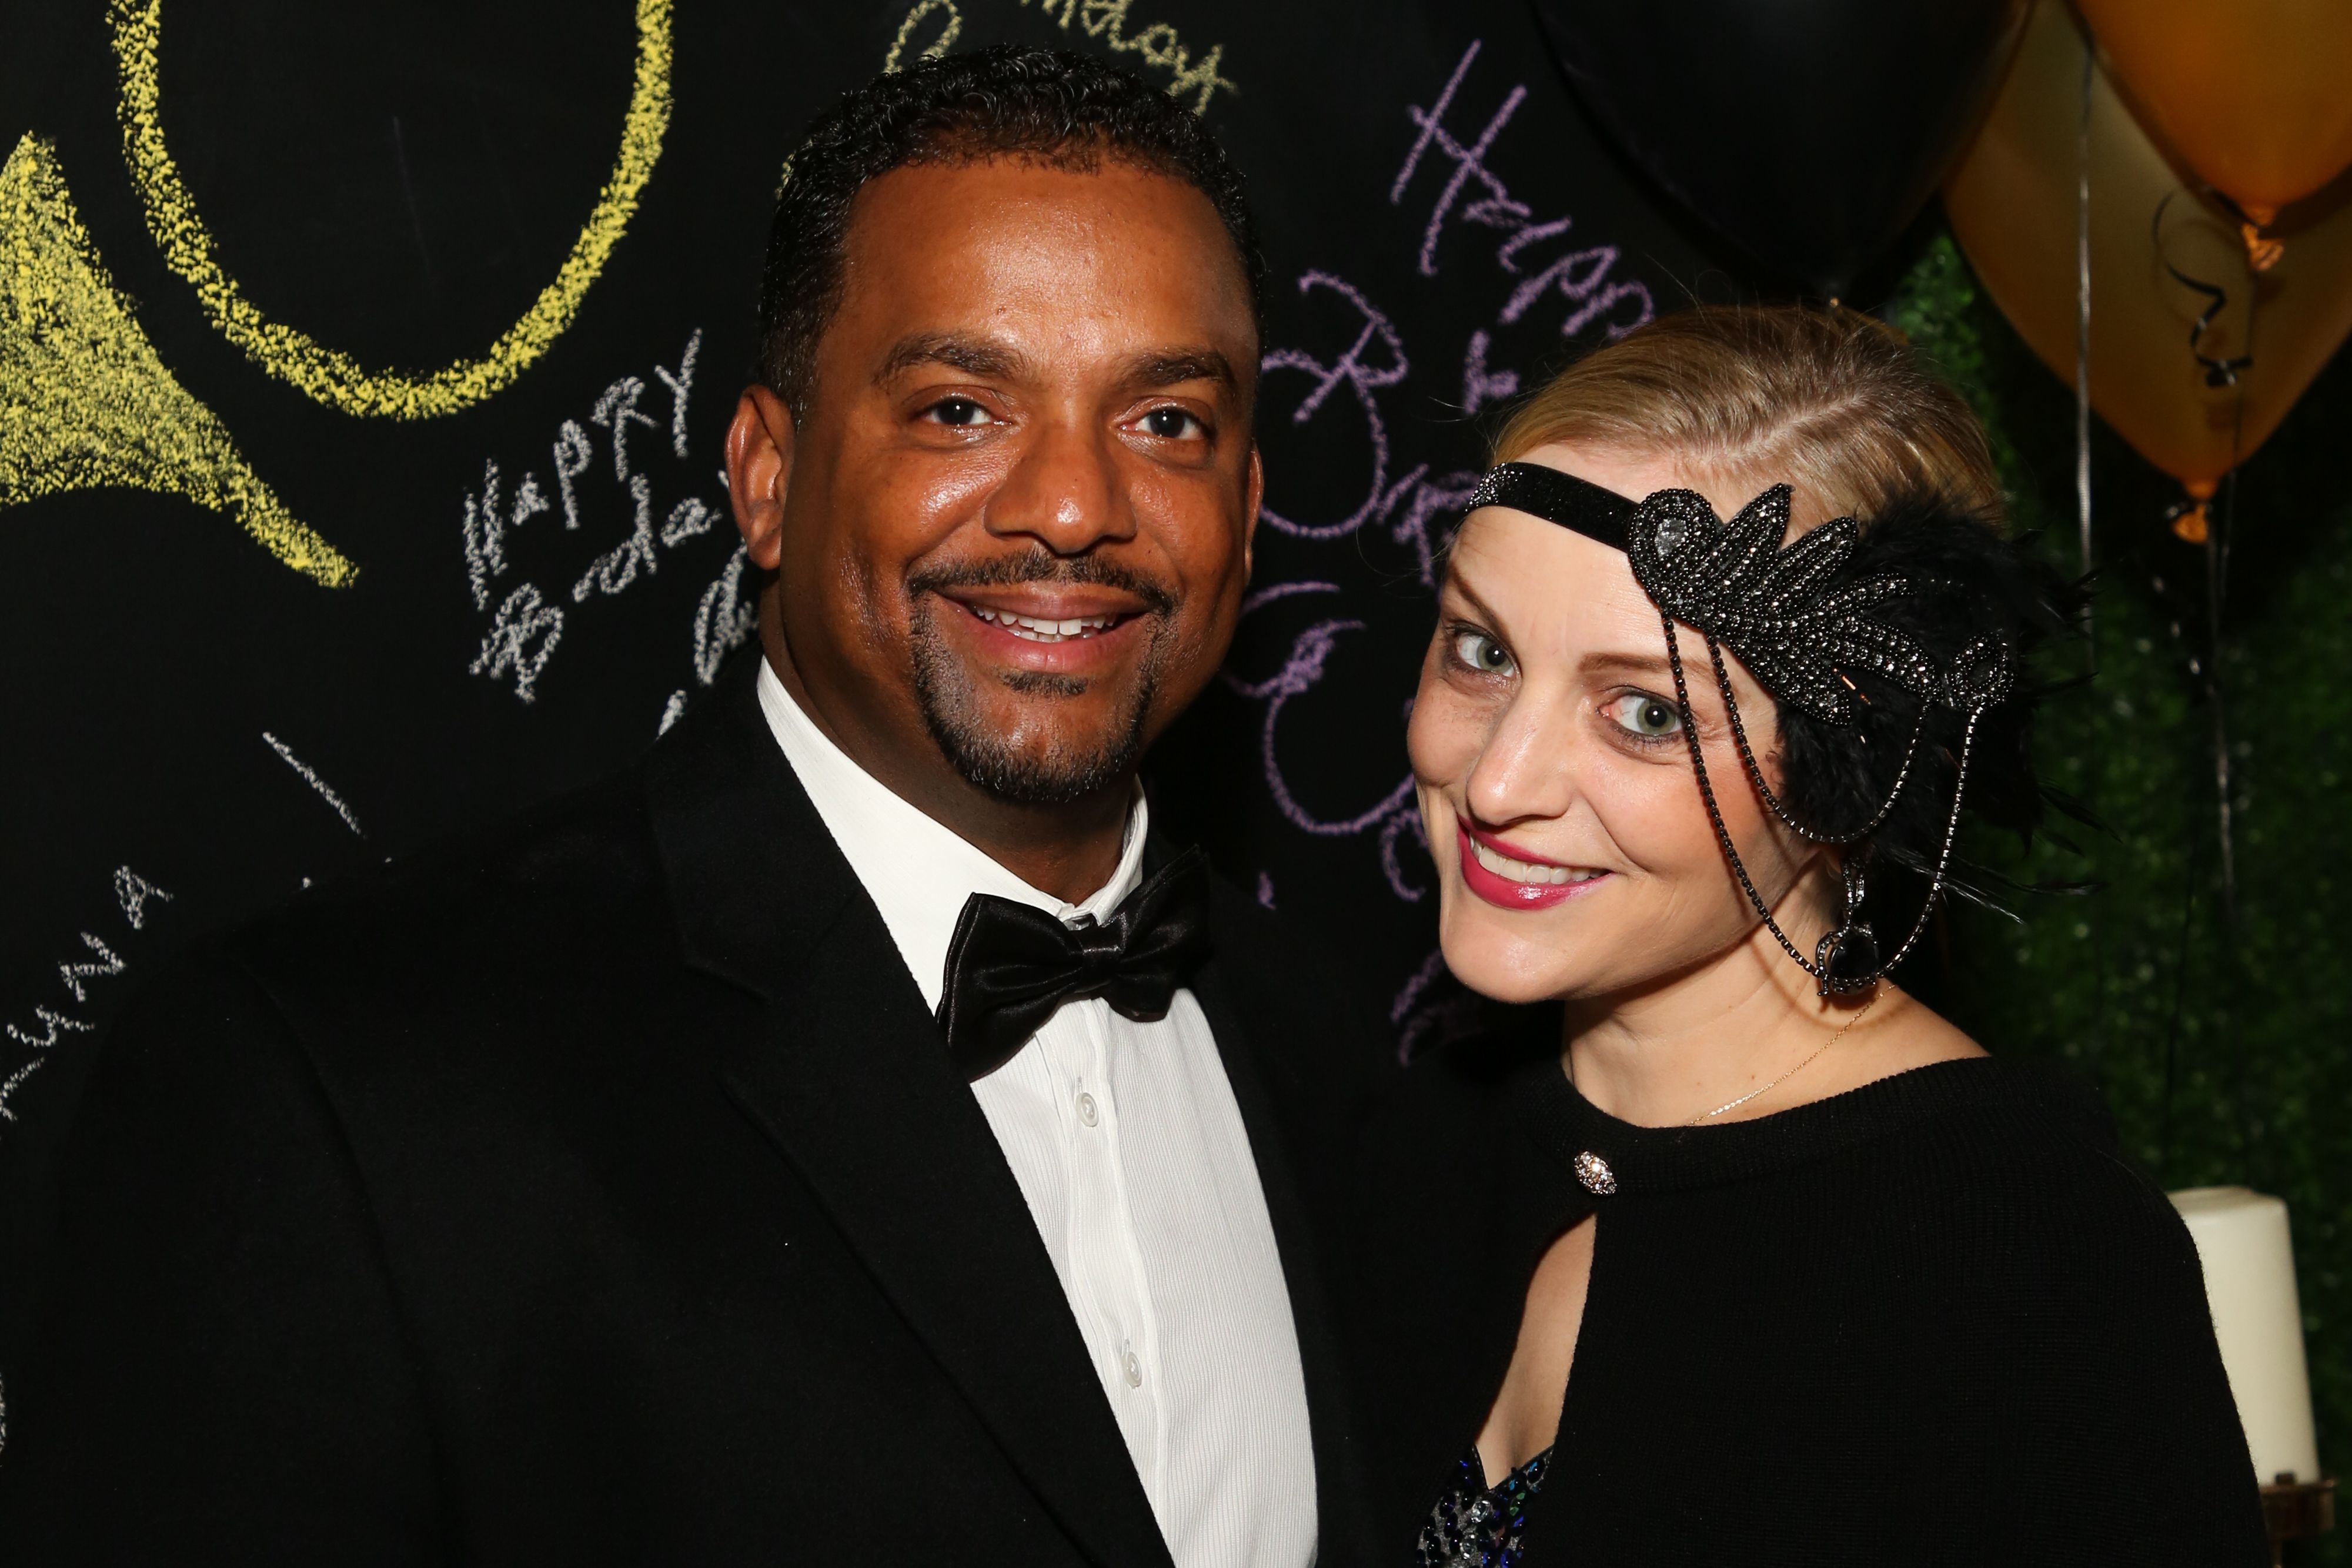 Alfonso Ribeiro and his Wife Angela Unkrich at the Birthday Celebration for Keo Motsepe on November 30, 2019 in Los Angeles, California | Photo: Getty Images 